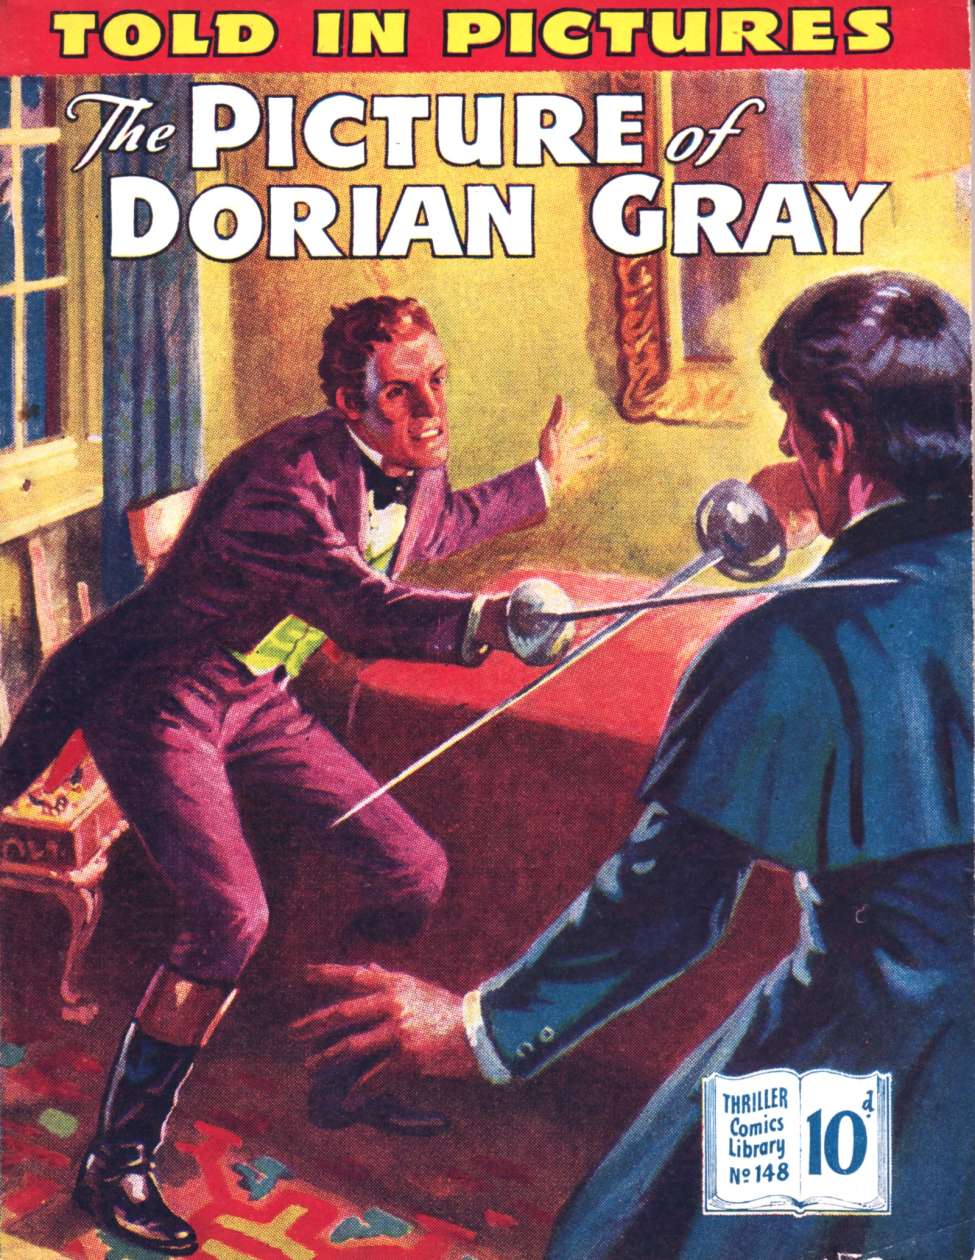 Comic Book Cover For Thriller Comics Library 148 - The Picture of Dorian Gray